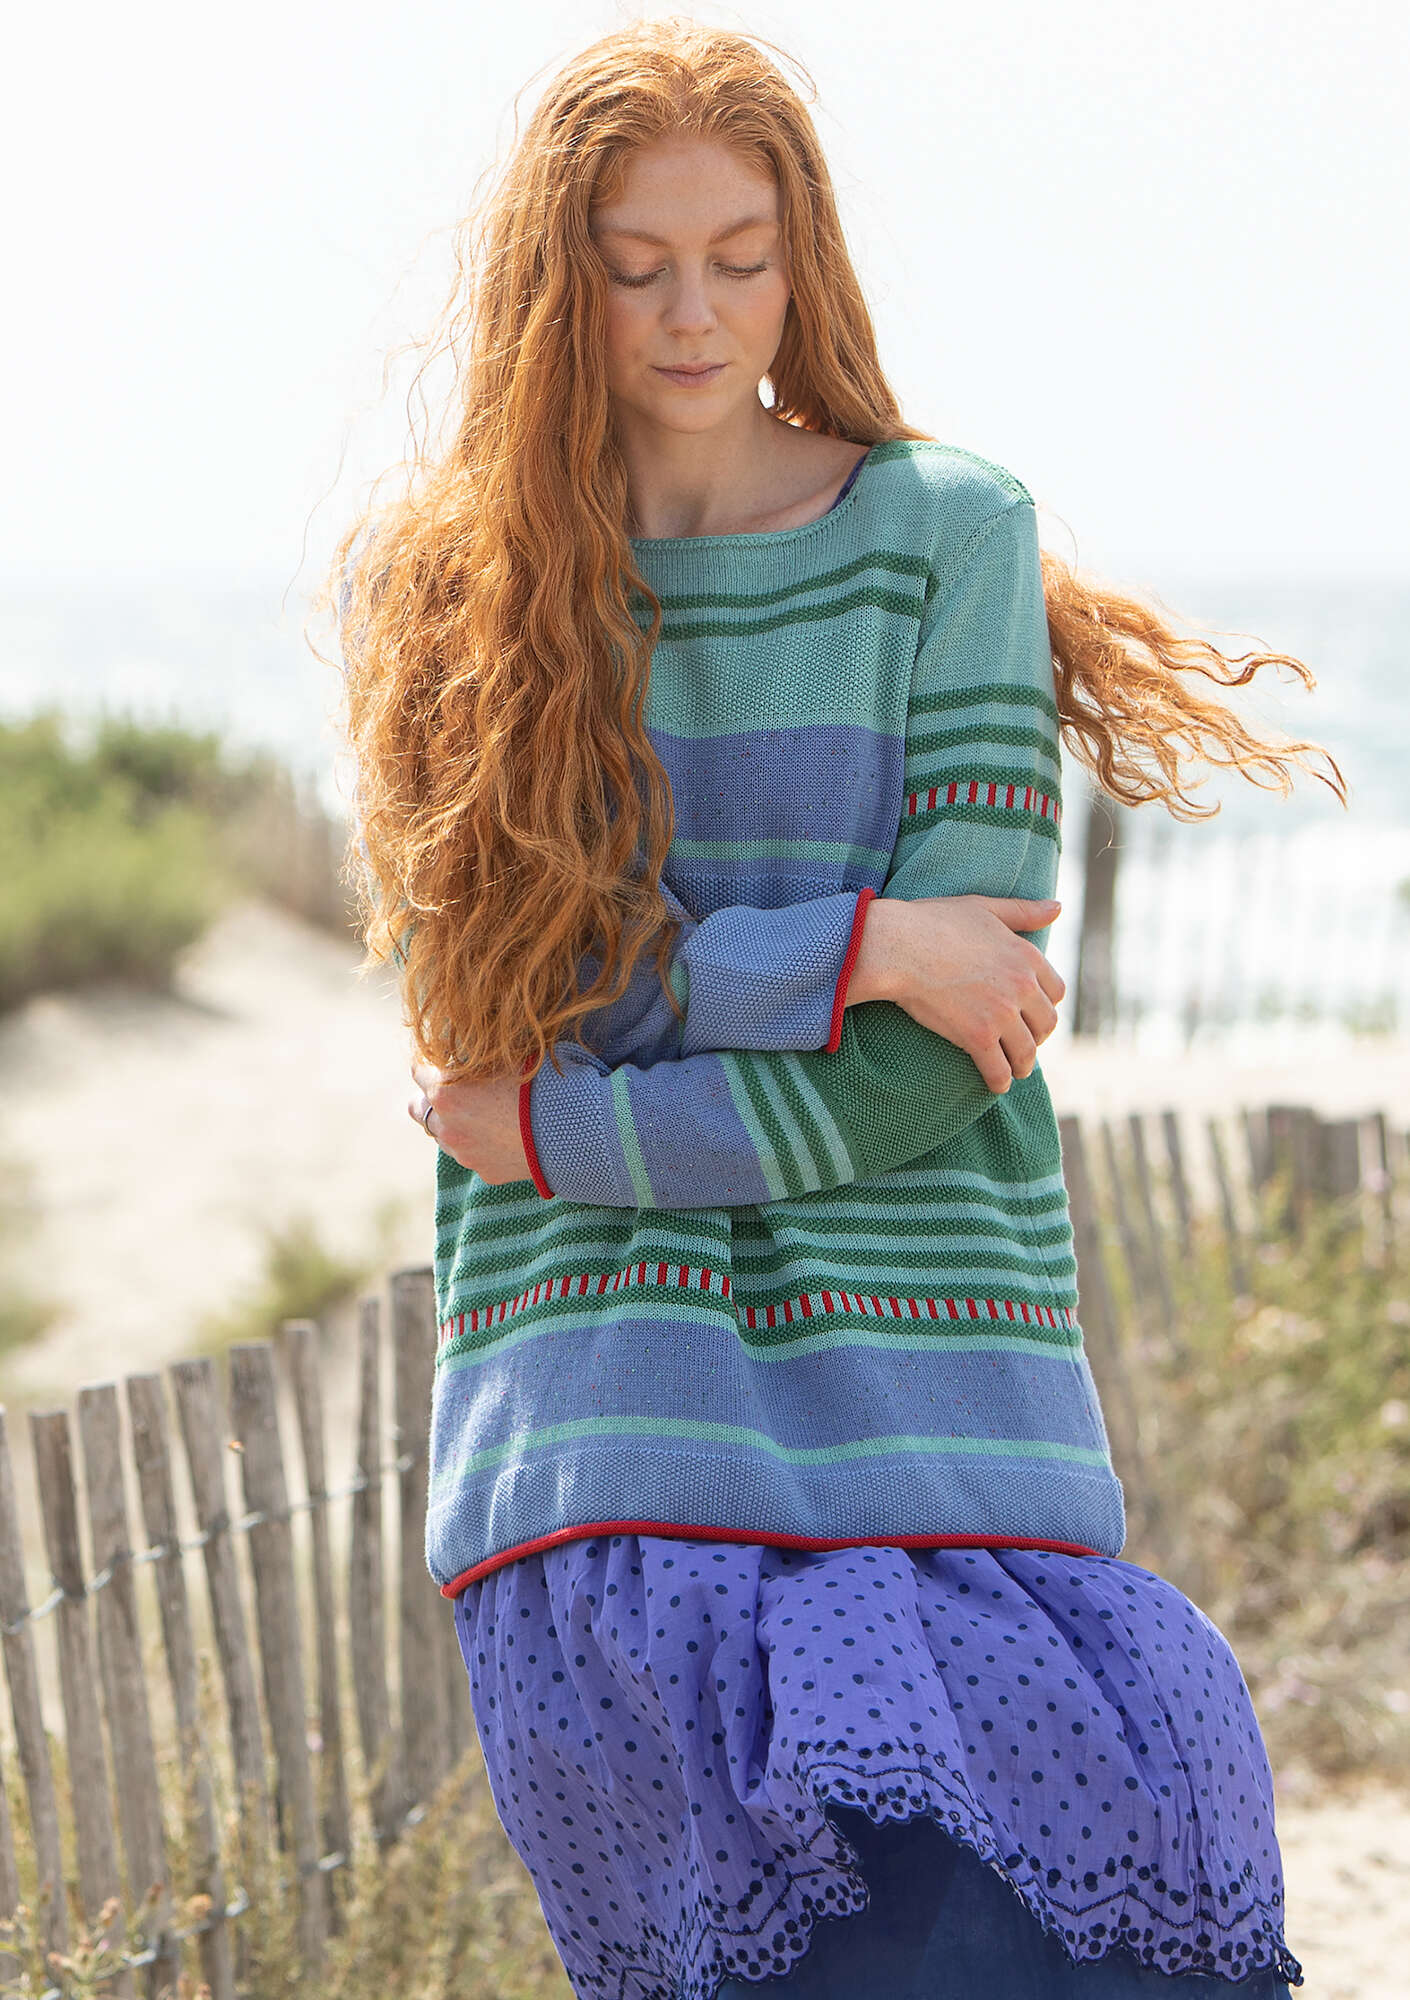 “Alfrida” sweater in recycled and organic cotton meadow stream/striped thumbnail